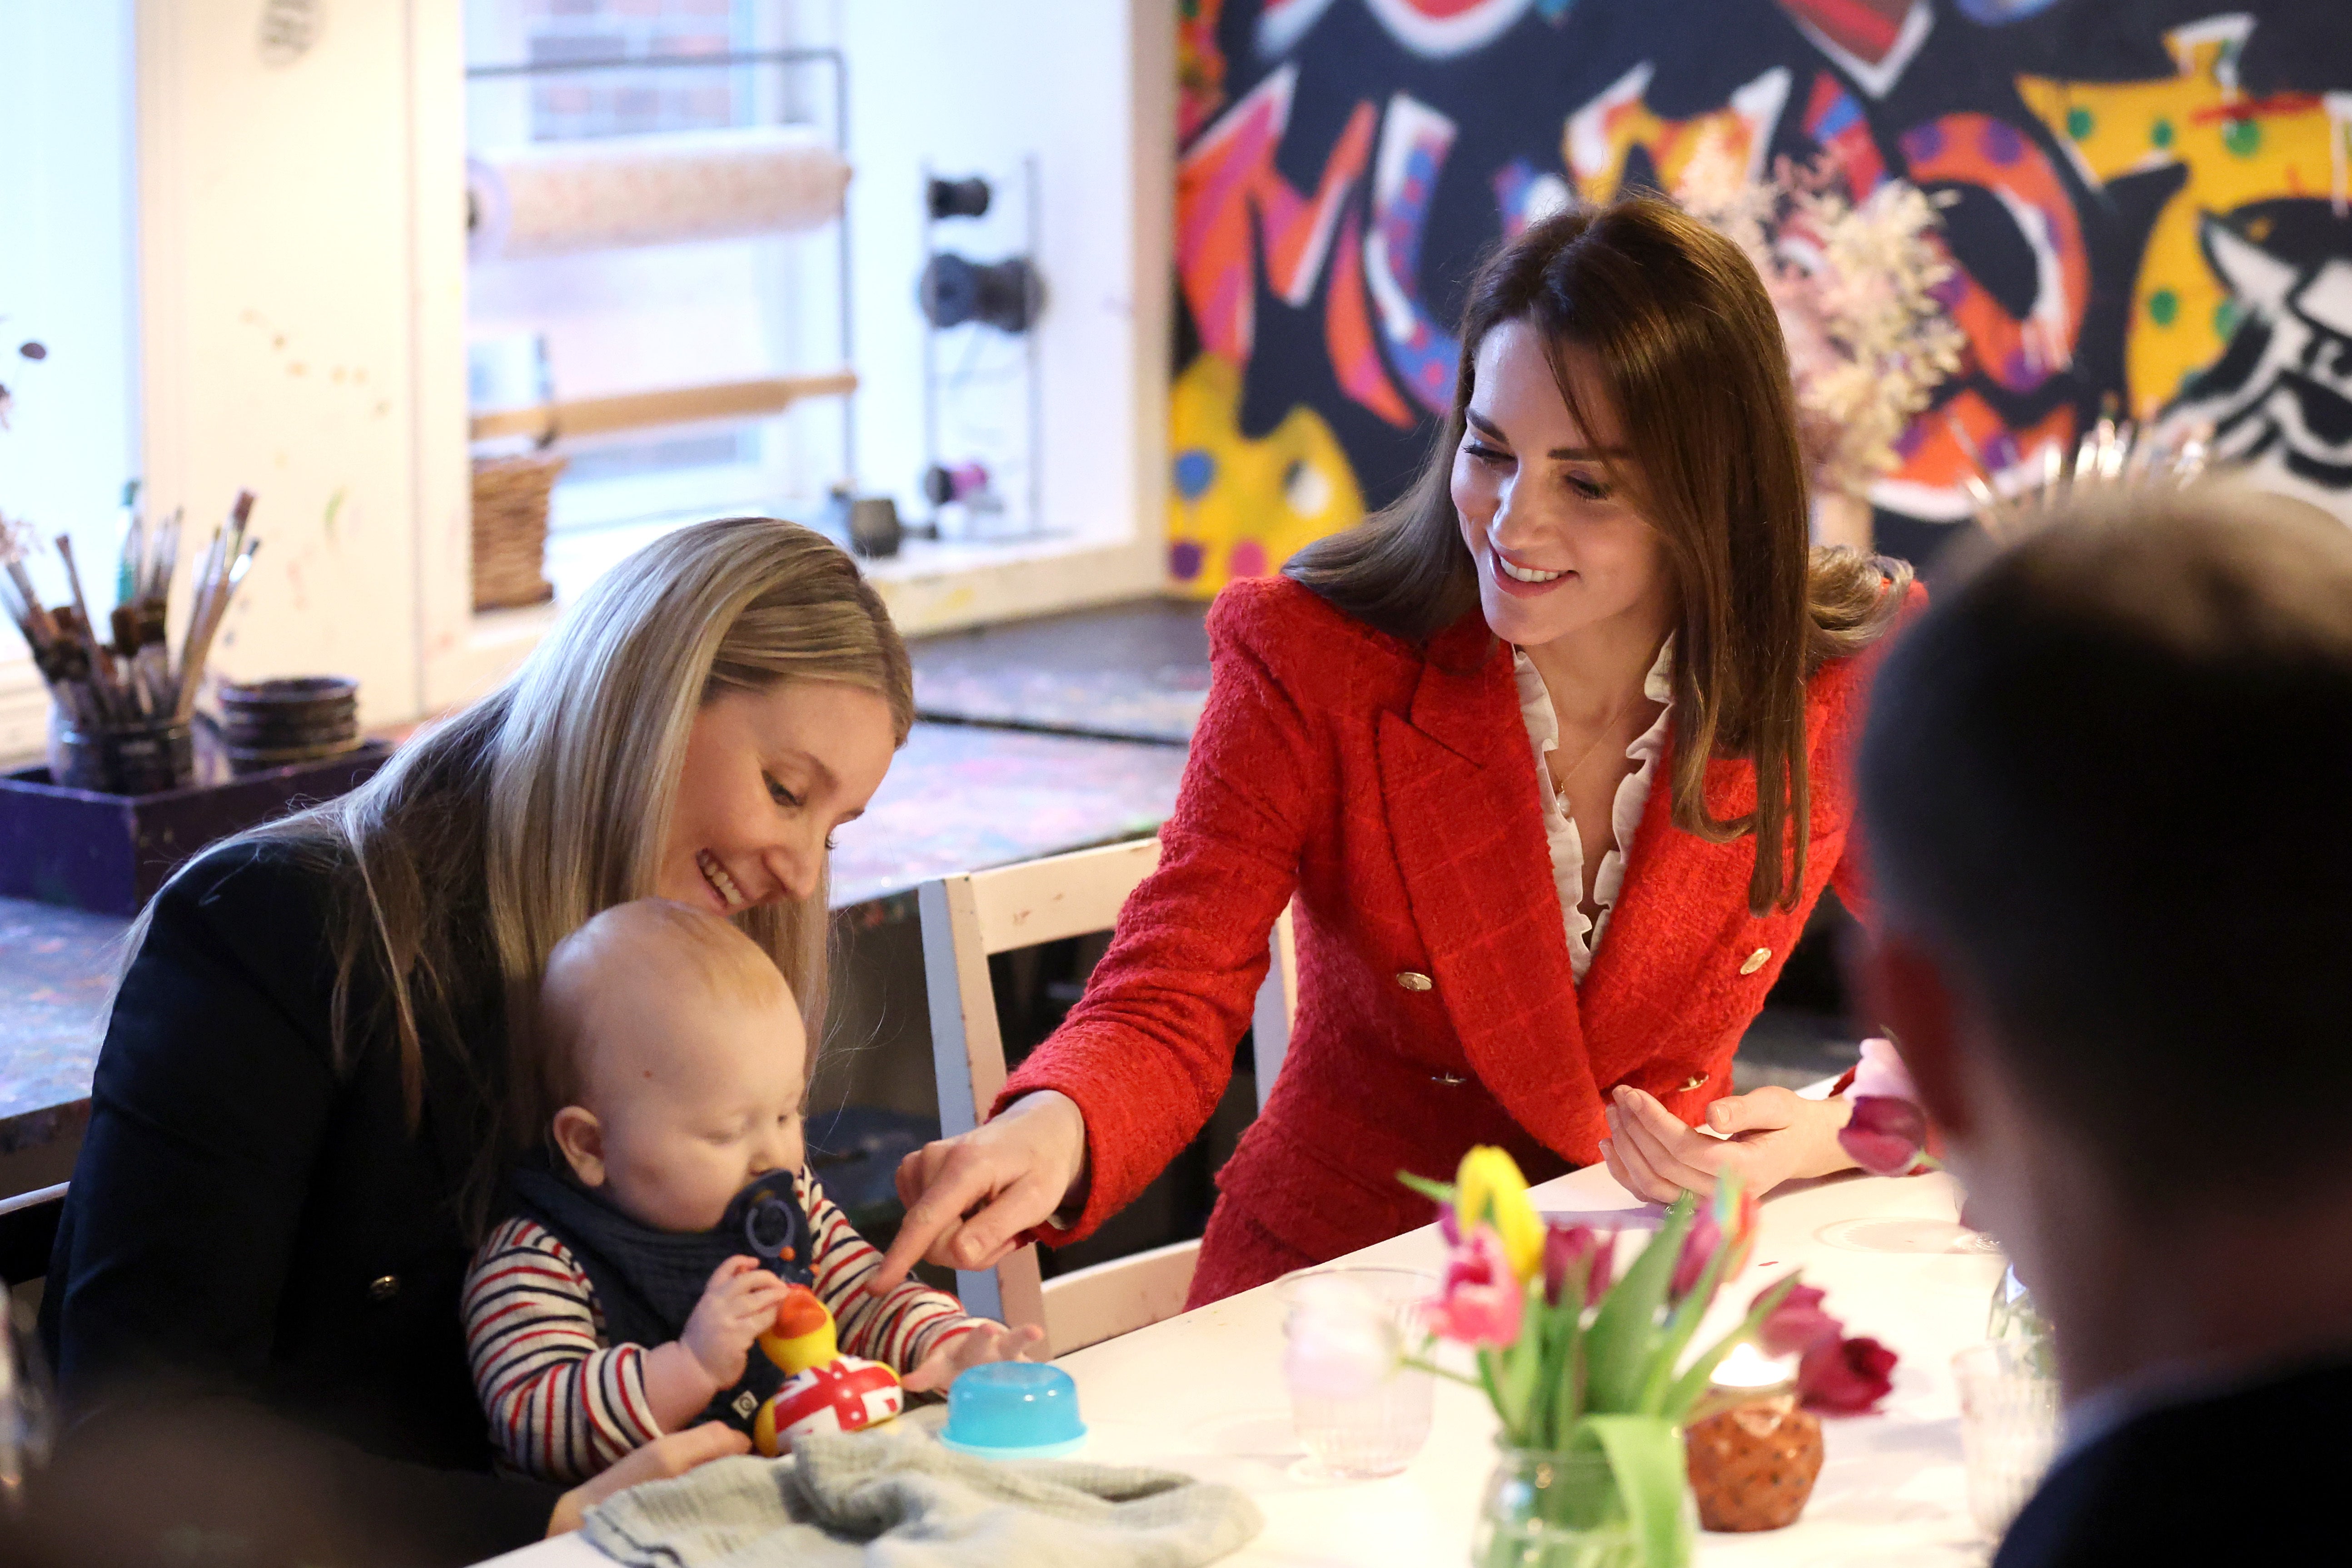 The Duchess of Cambridge has taken a close interest in early years development (Chris Jackson/PA)